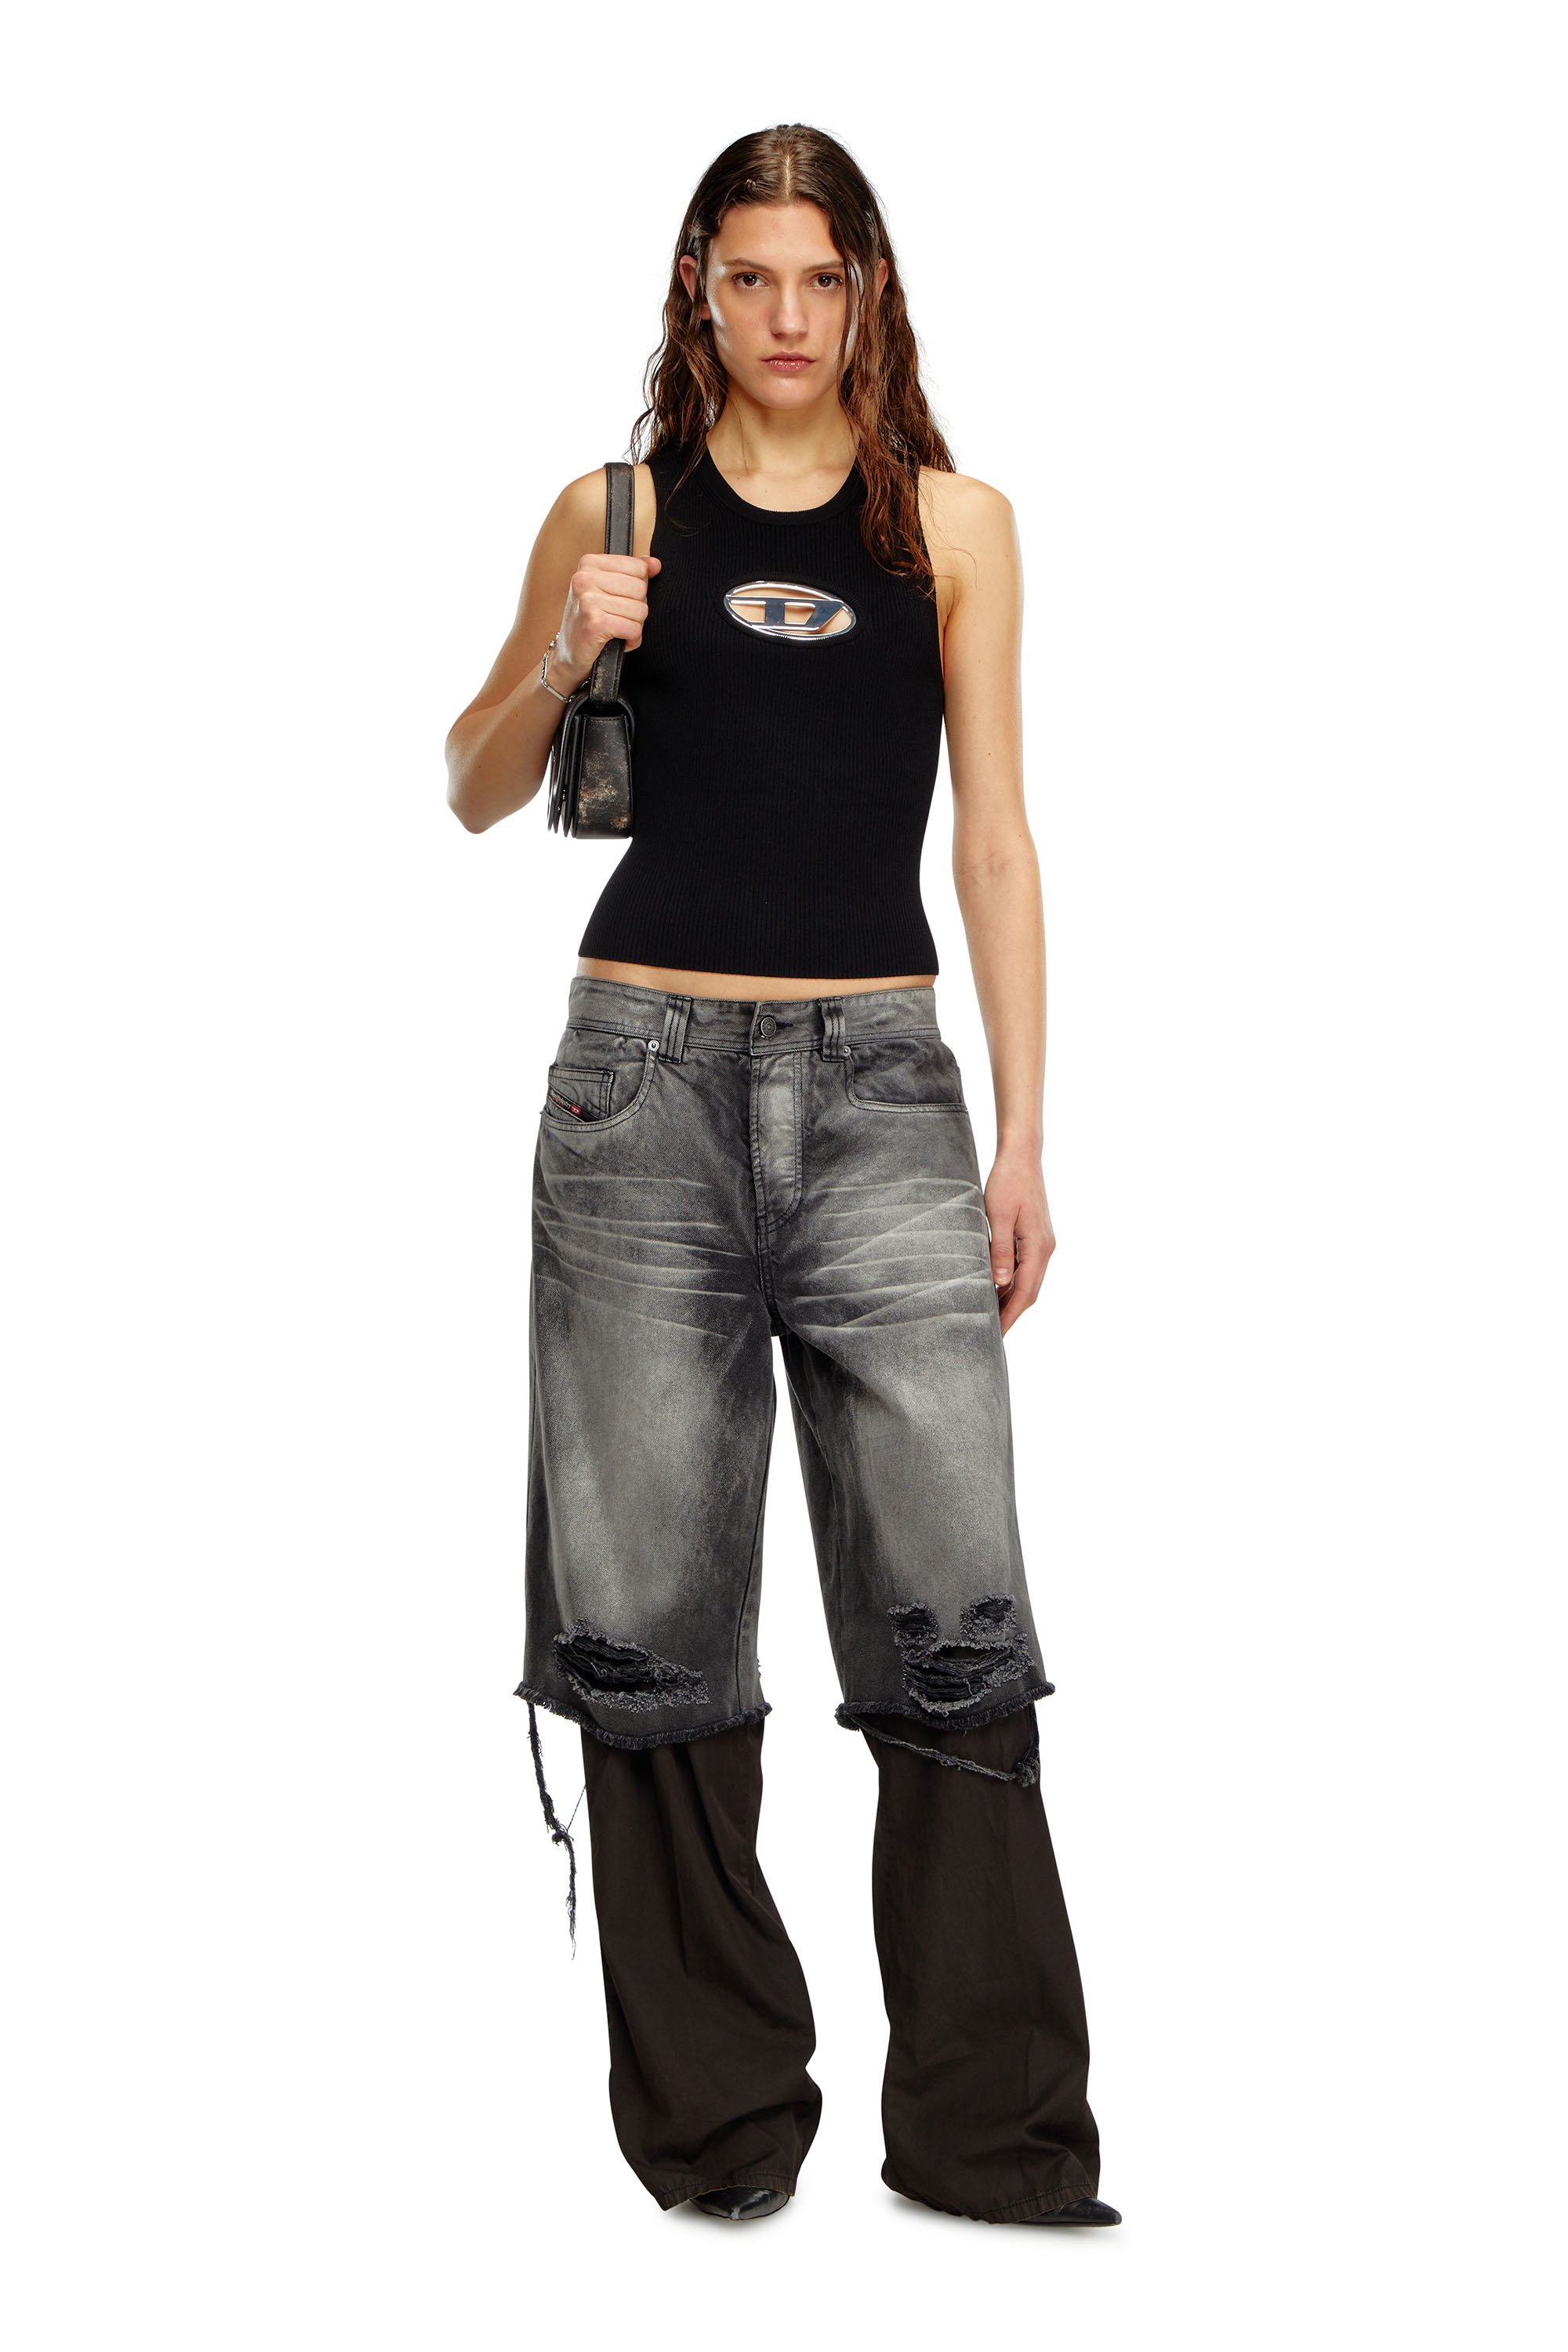 Diesel Women Jeans and Apparel: New Collection | Diesel®